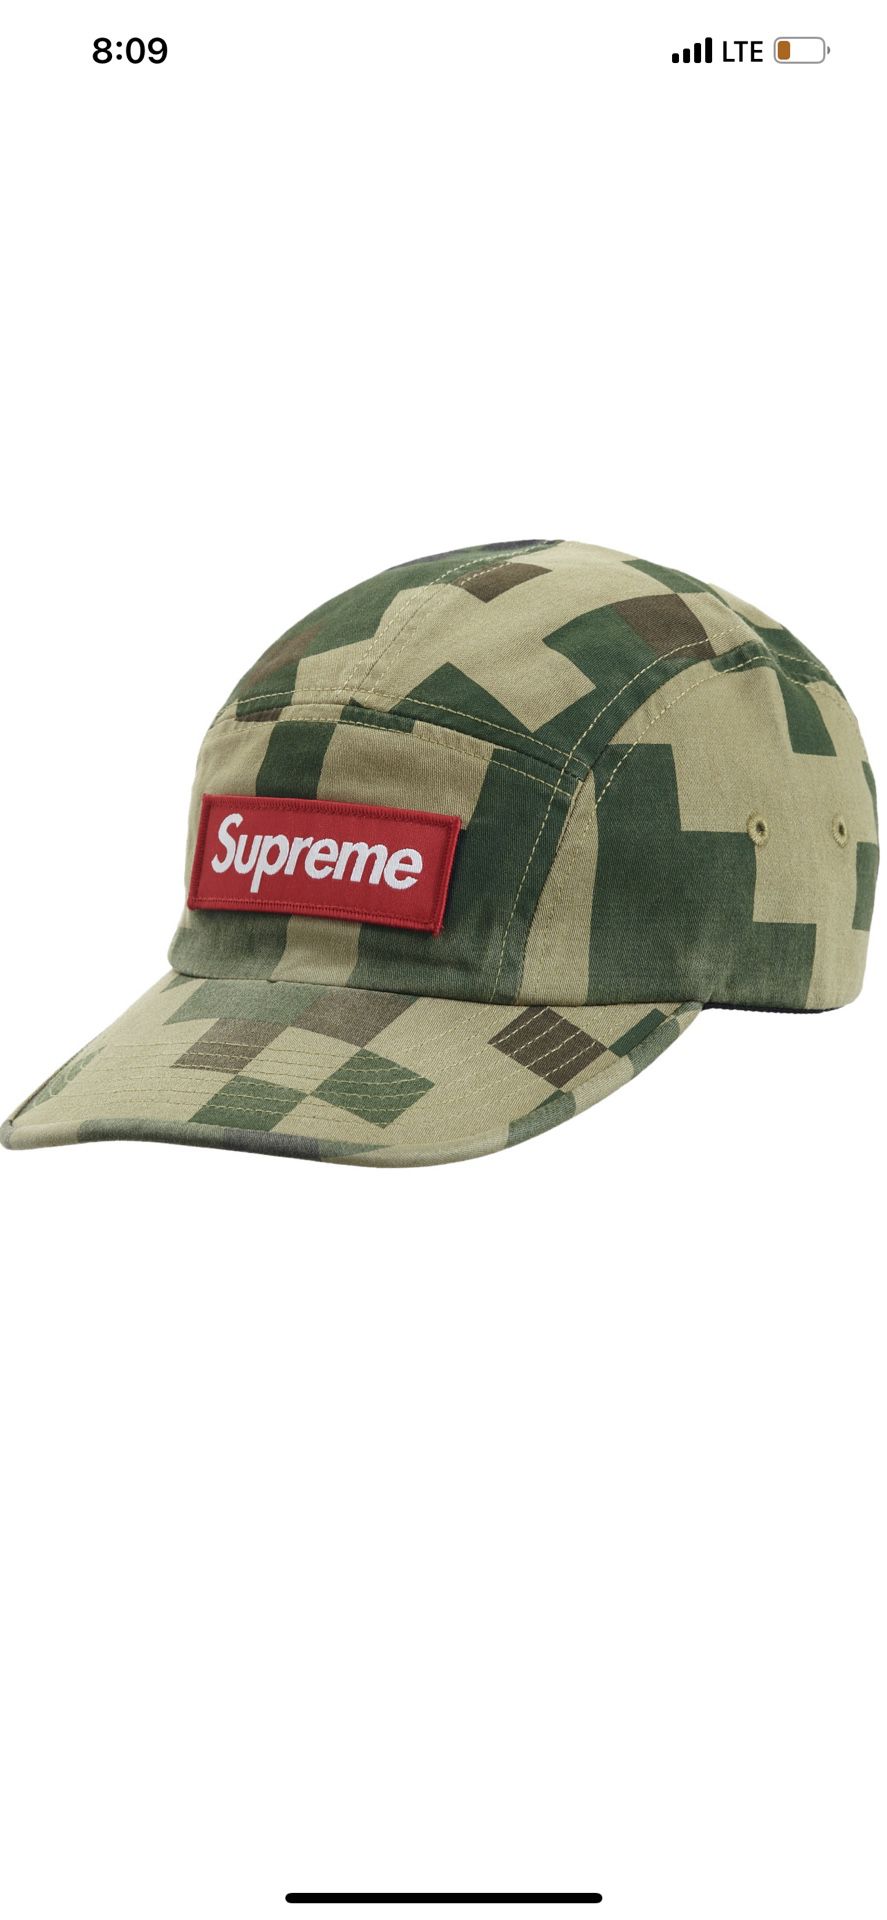 Brand new Supreme Hats For Sale 